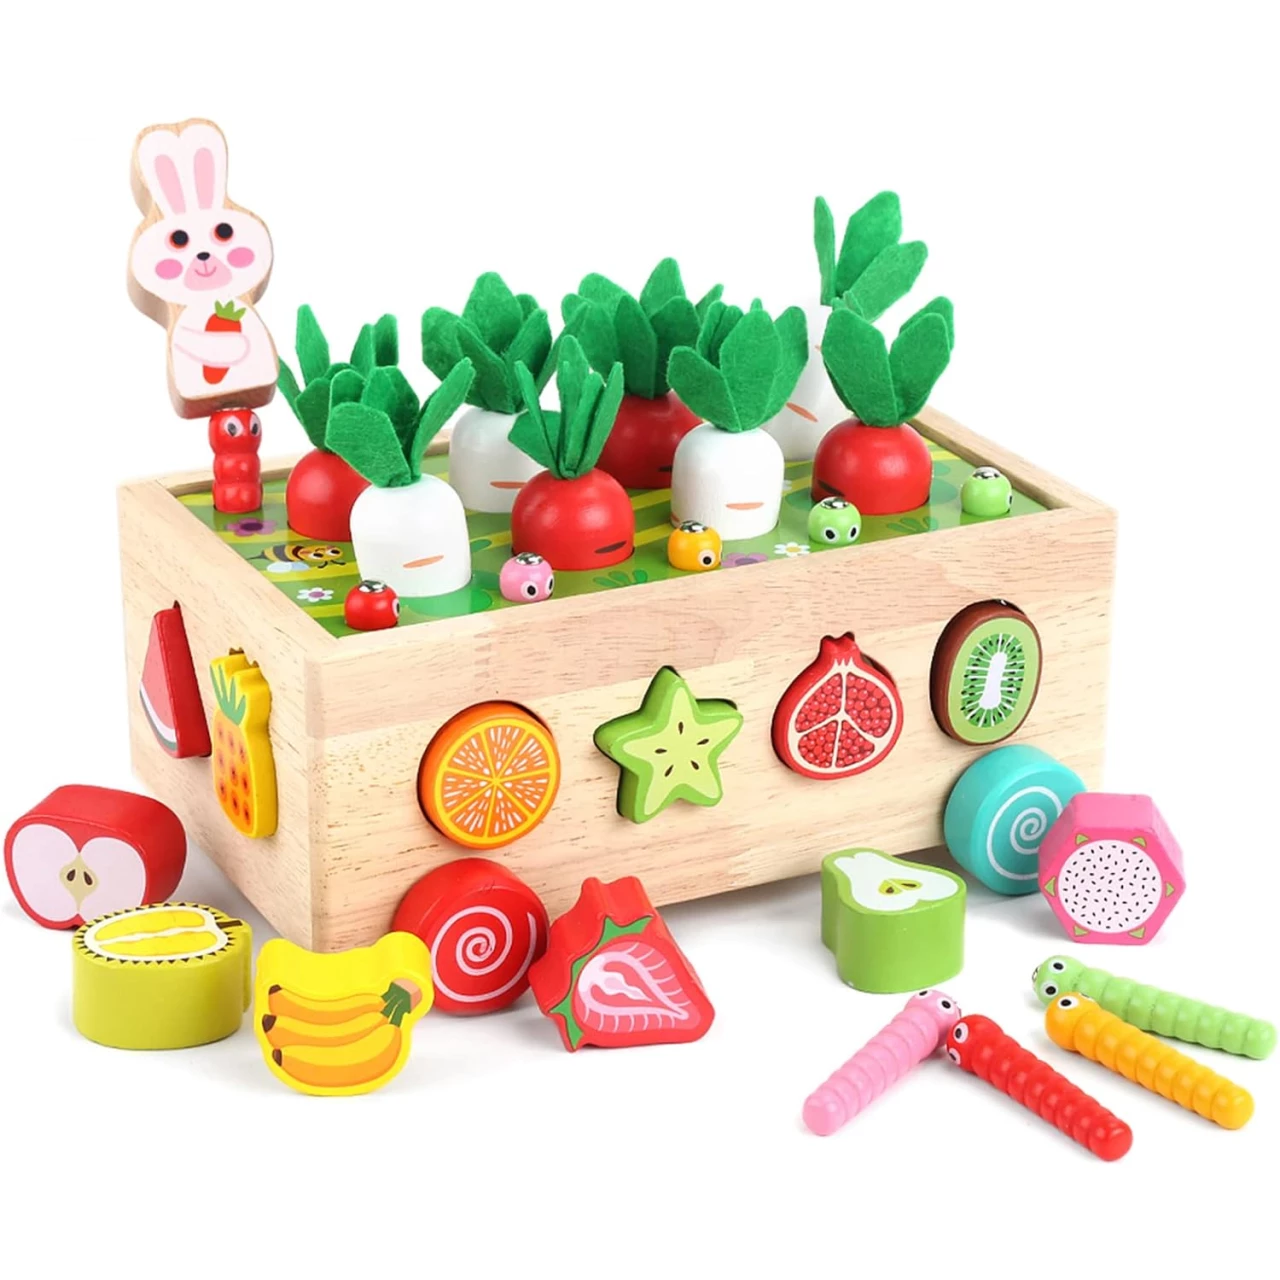 Toddlers Montessori Wooden Educational Toys for Baby Boys Girls Age 1 2 3 Year Old, Shape Sorting Toys Gifts for Kids 2-4, Wood Preschool Learning Fine Motor Skills Game